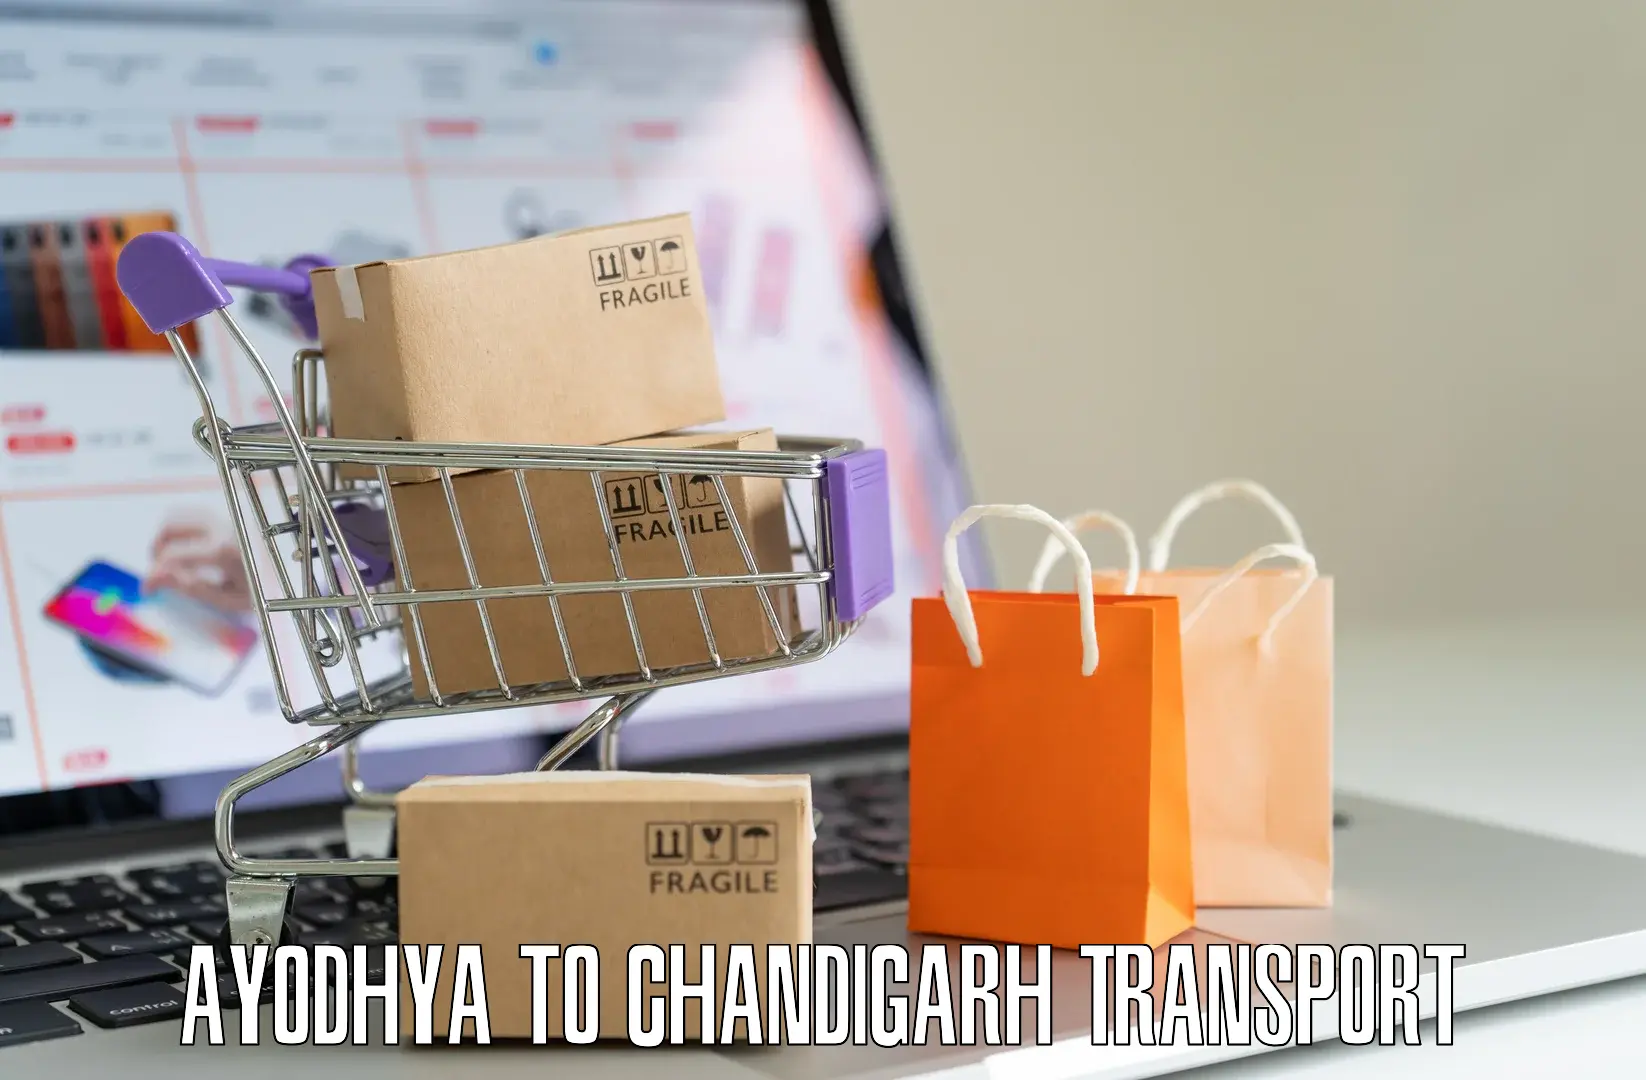 Vehicle courier services Ayodhya to Chandigarh